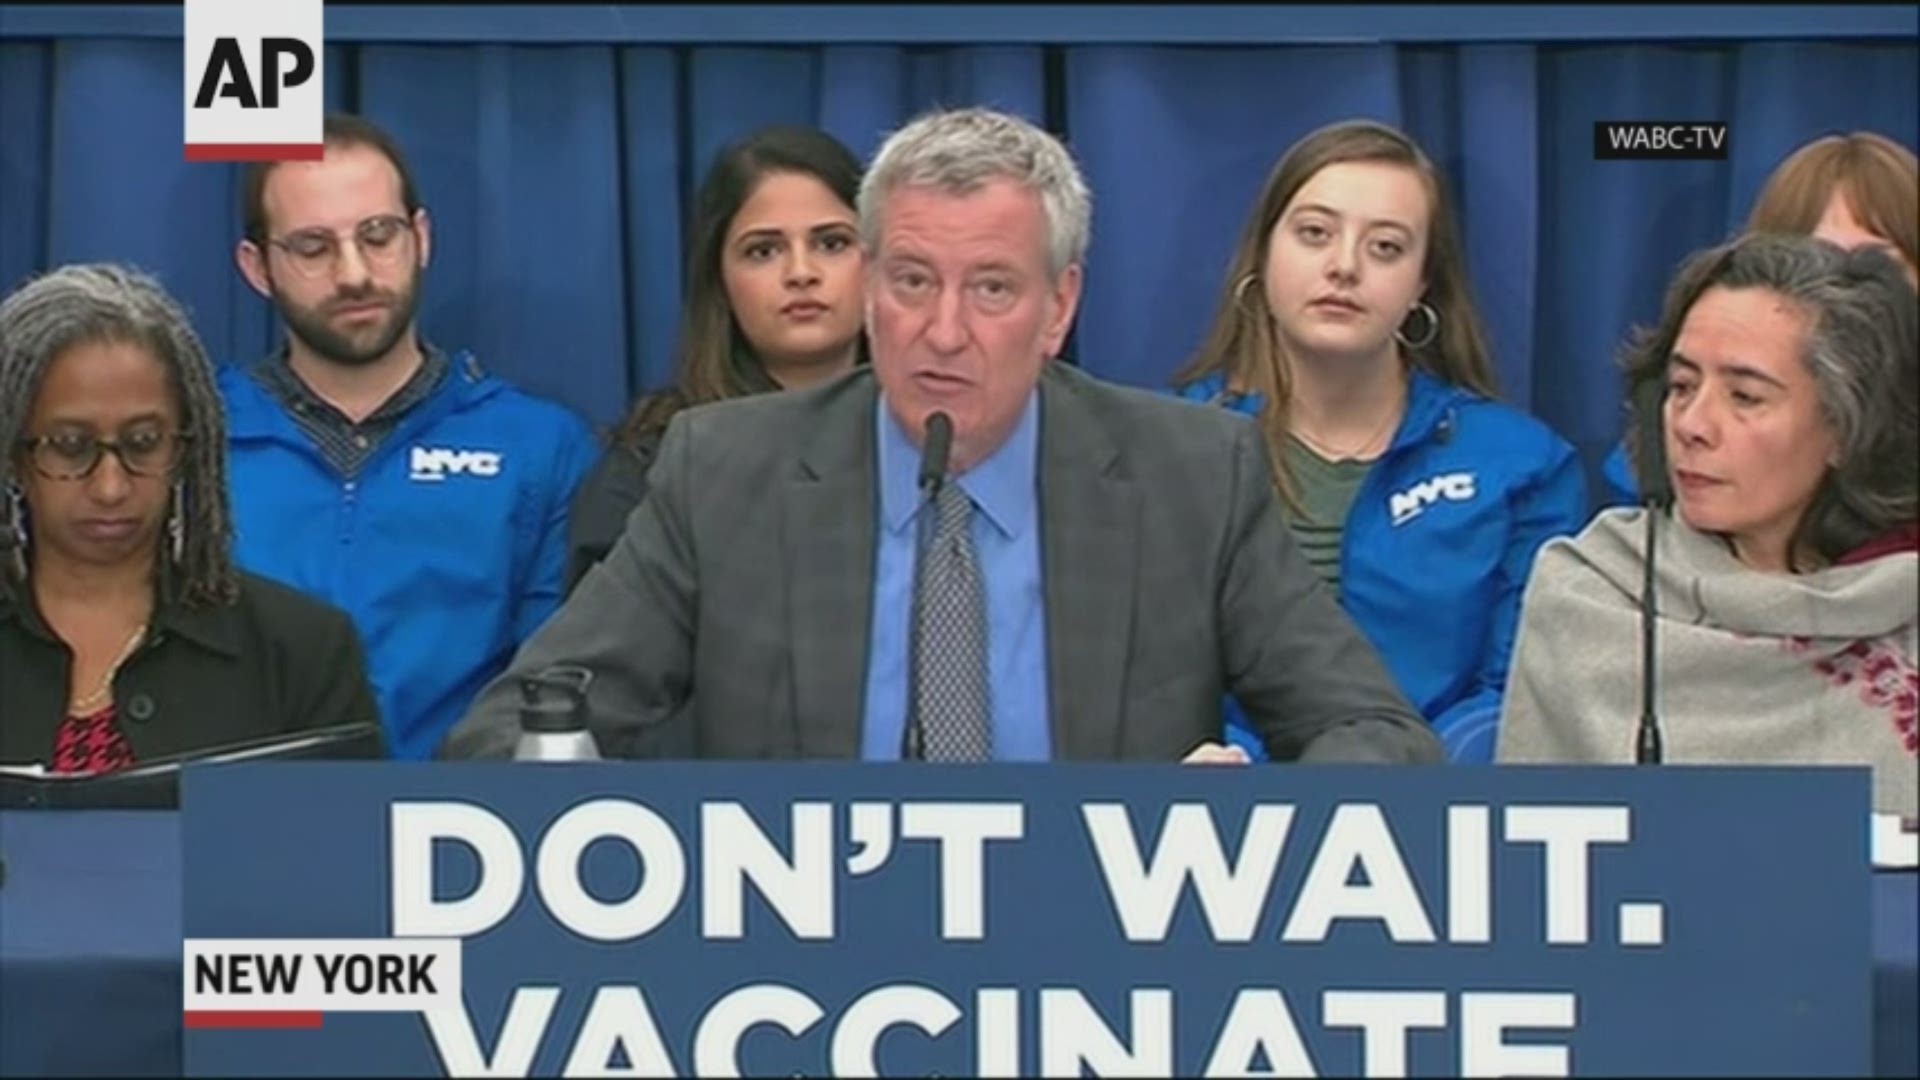 New York City has declared a health emergency over a measles outbreak and ordered mandatory vaccinations for people who may have been exposed to the virus. (WABC via AP)